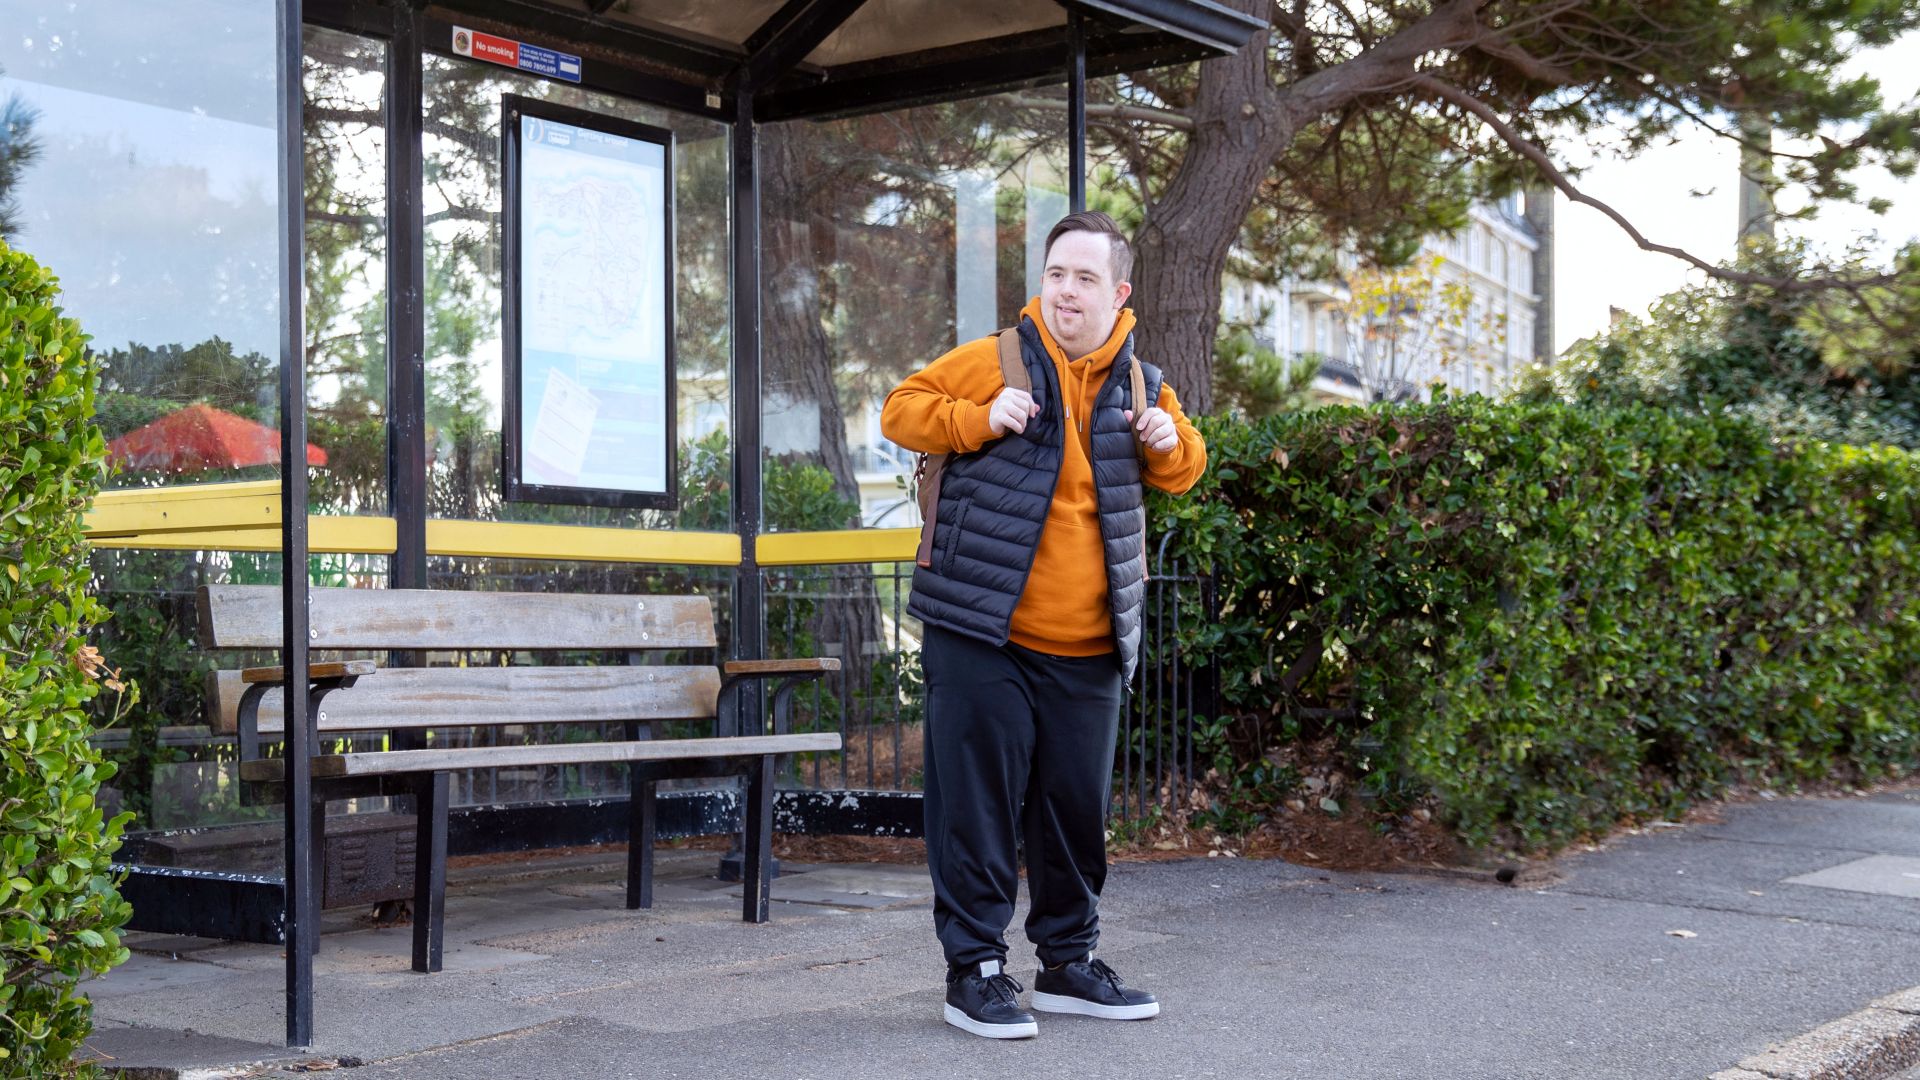 A man wearing an orange hoodie and a backpack eagerly waiting at a bus stop.